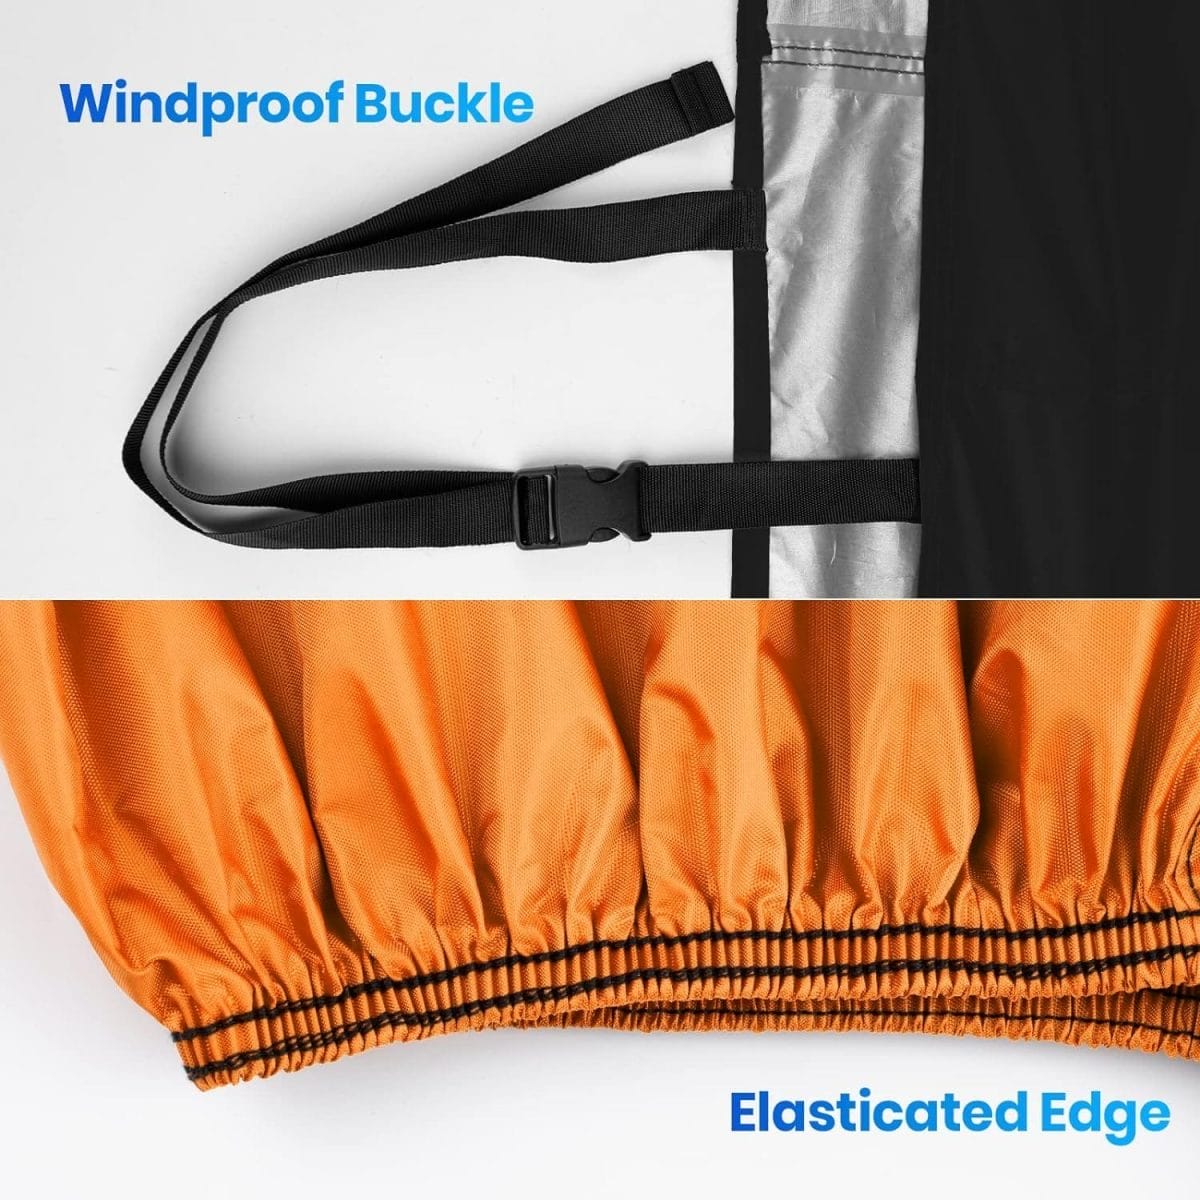 Favoto Bike Cover Waterproof Outdoor Bicycle Cover for 2-3 Bikes UV Snow Wind Proof with Anti-Theft Lock Hole Reflective Straps Storage Bag for Mountain Road Electric City Bike 79x41.3x44 Inch